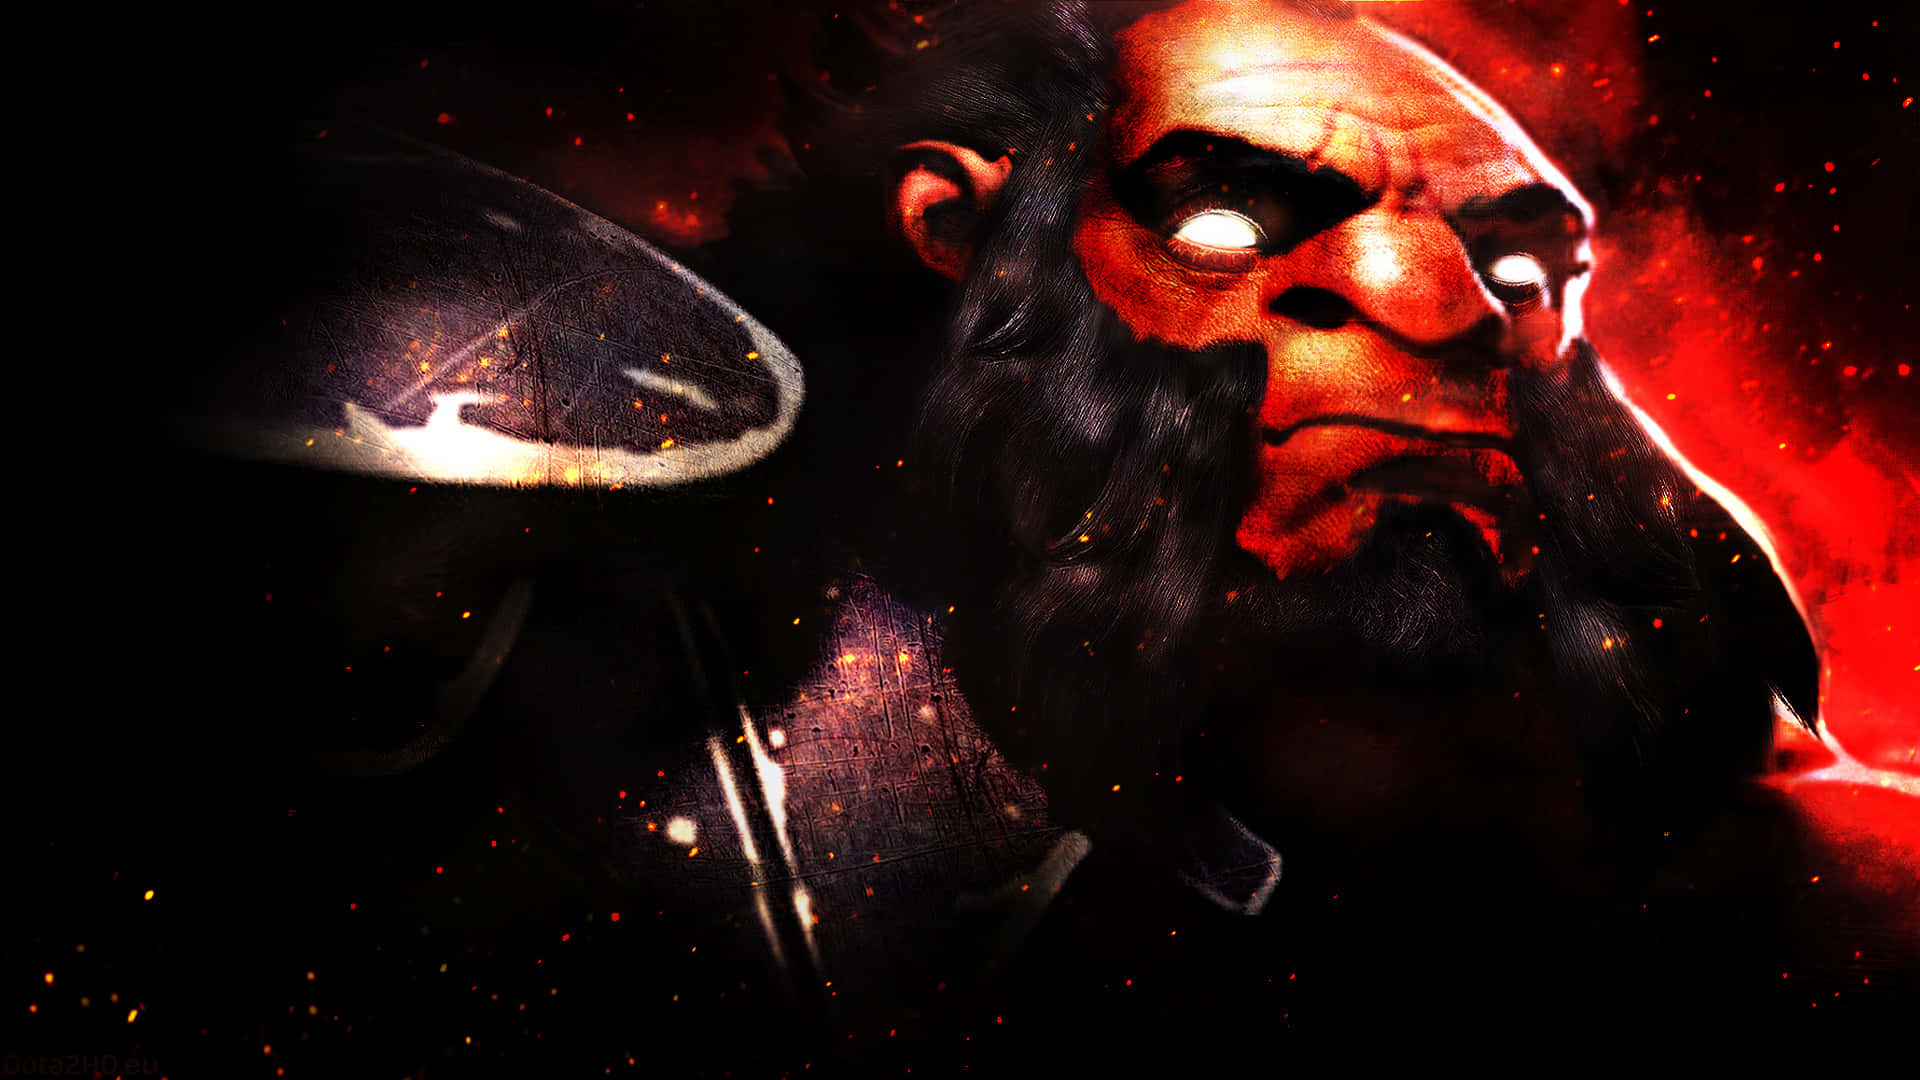 Dota 2 Action Hero - The Mighty Axe Unleashed Wallpaper